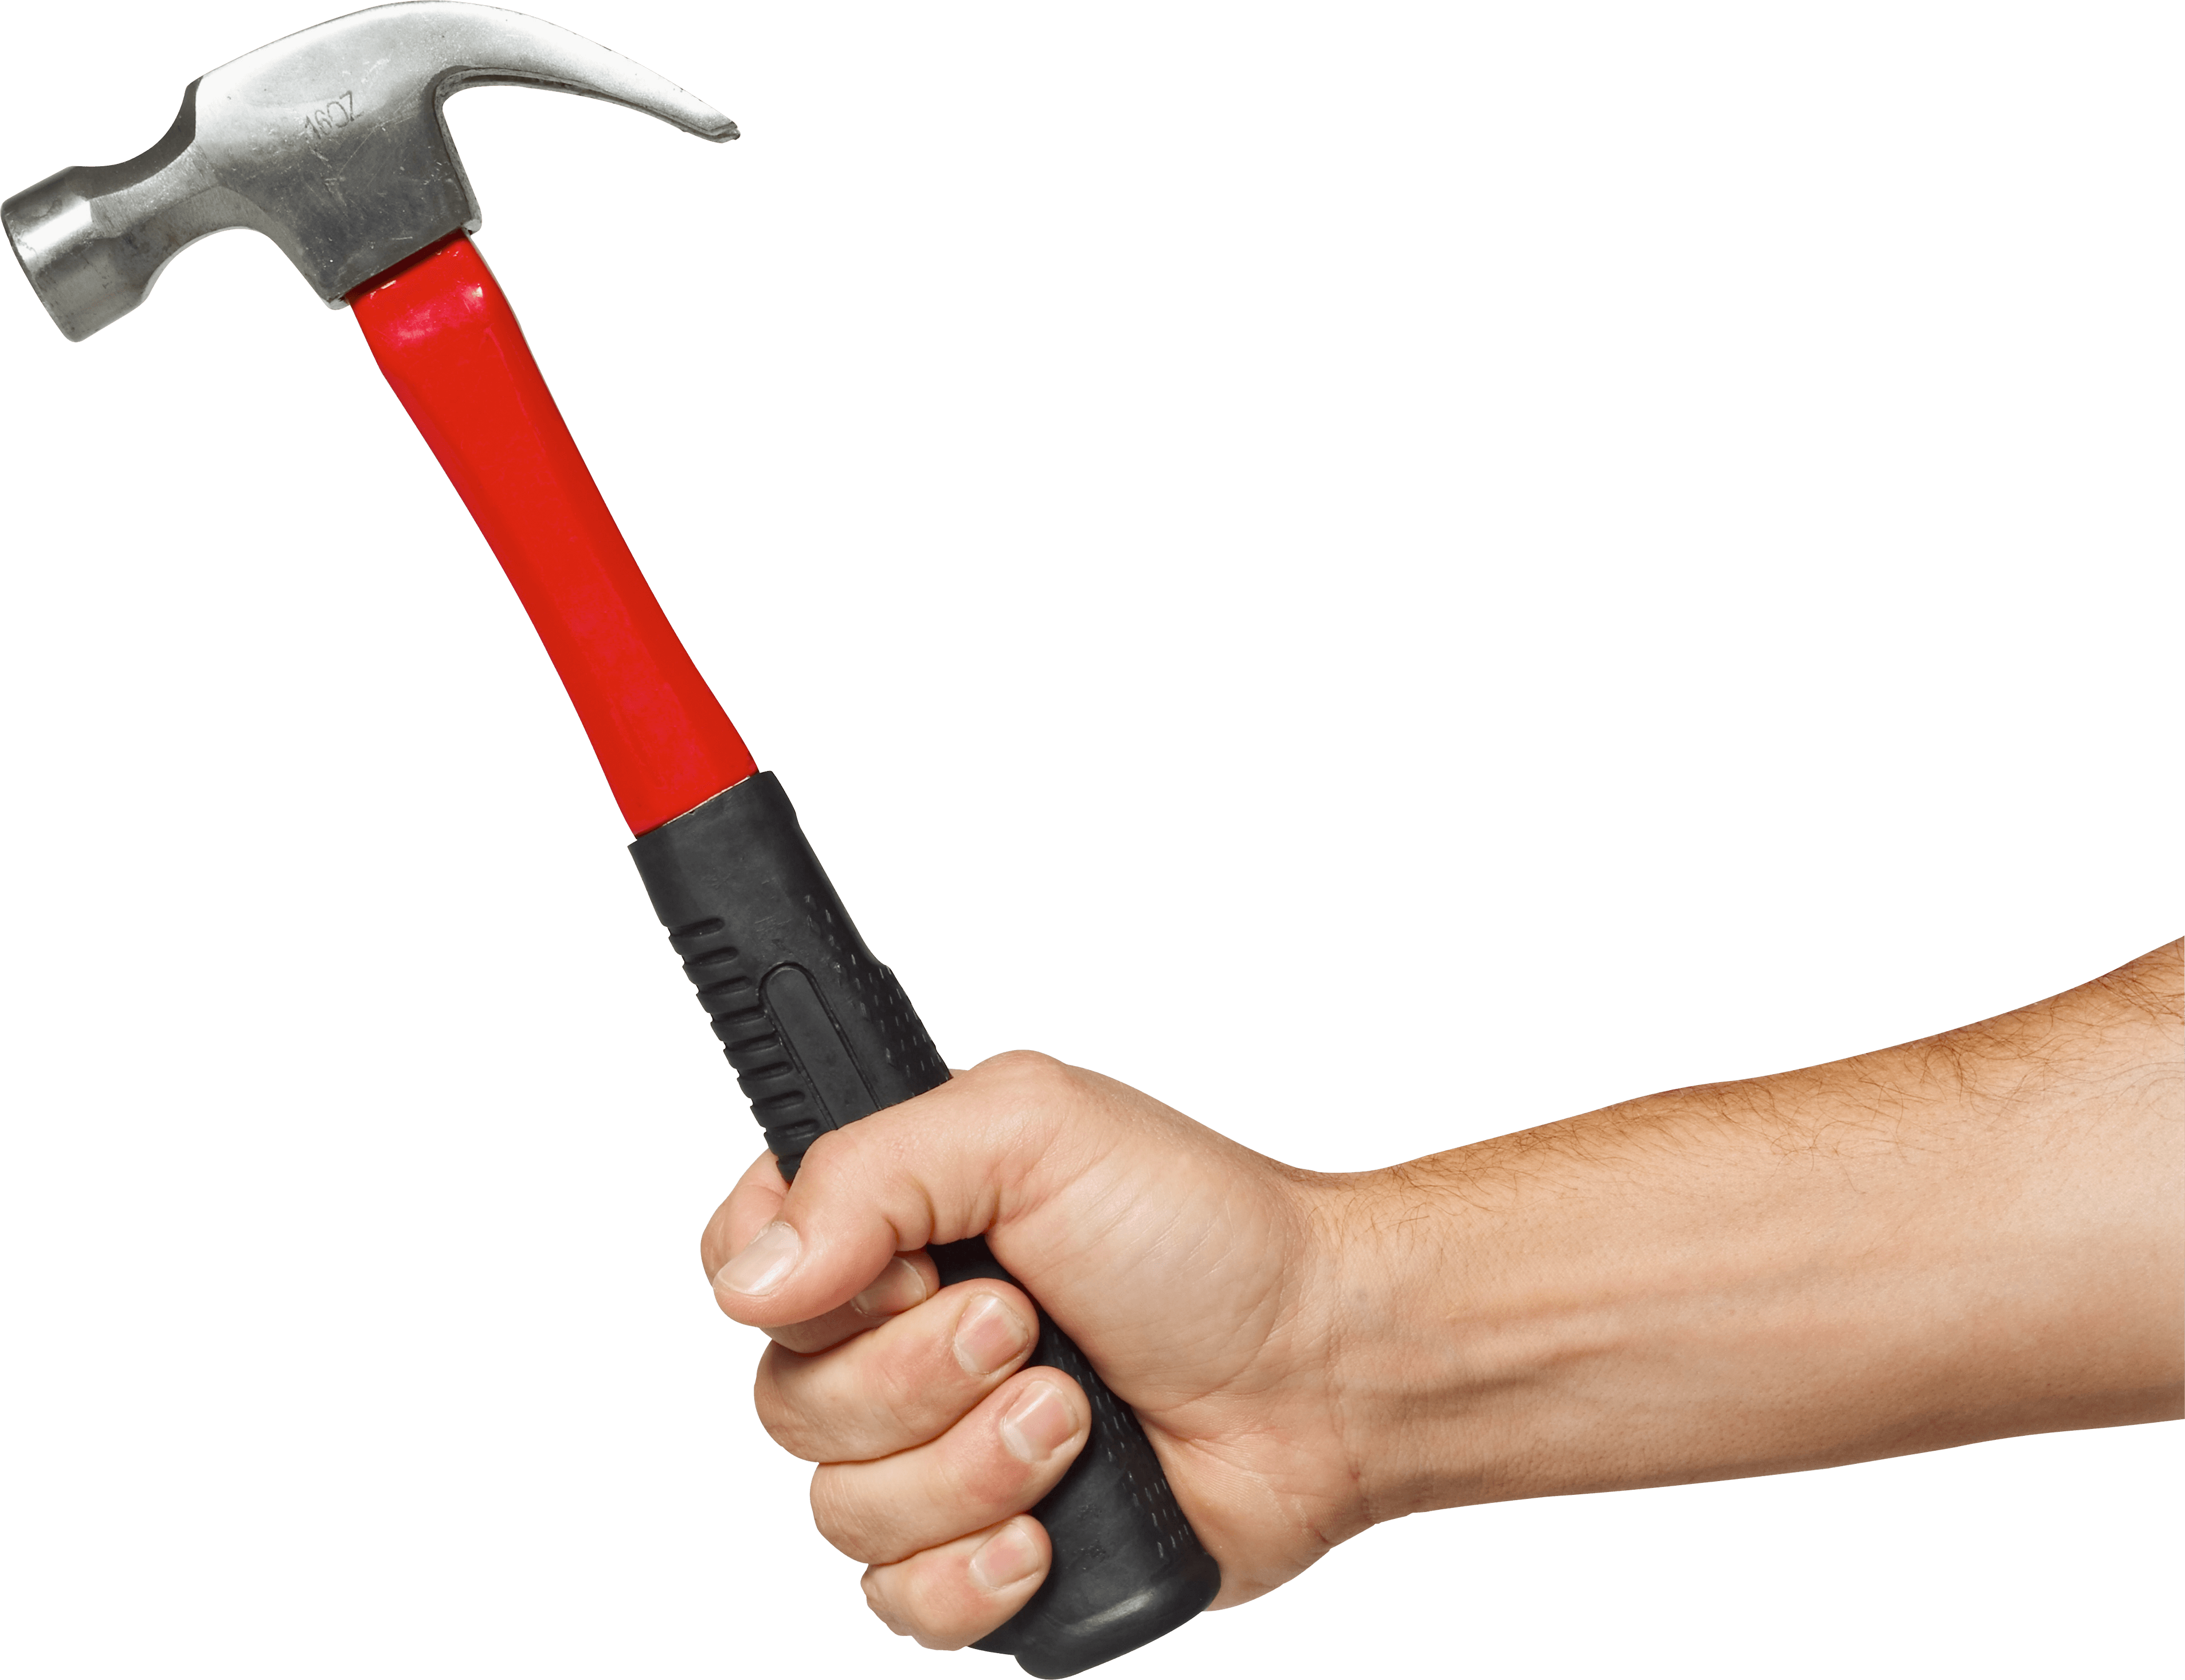 Hammer In Hand Png Image PNG Image